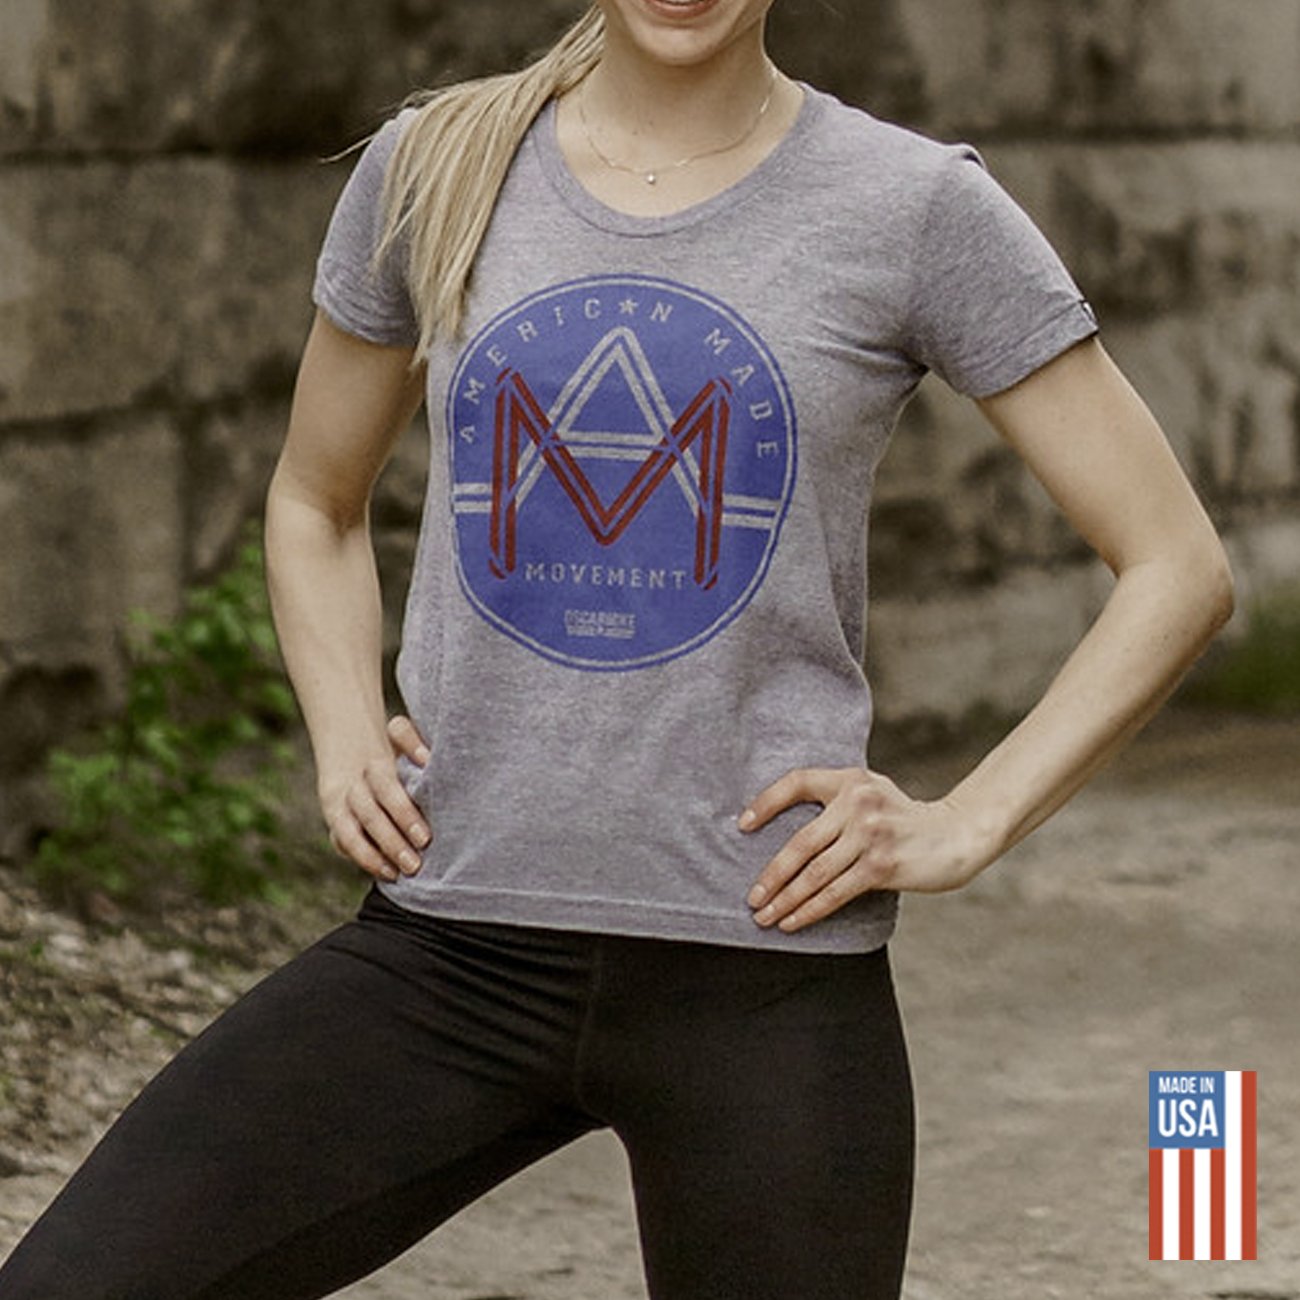 Women's American Made Movement Tee T-Shirt from Oscar Mike Apparel